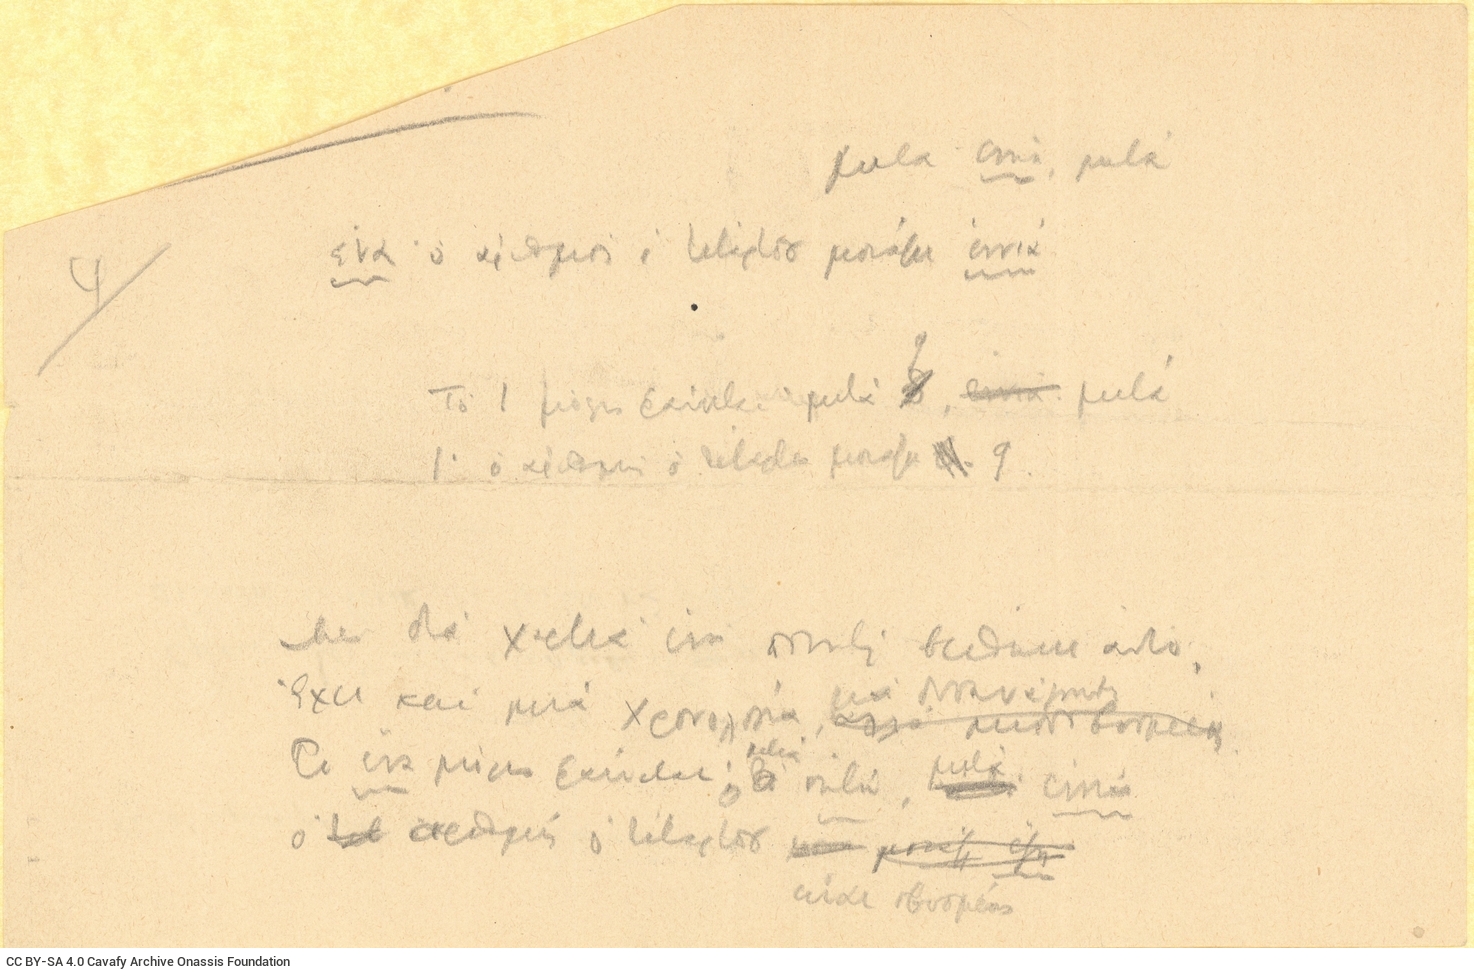 Handwritten drafts of the poem "Crime" on a ruled sheet; on two pieces of paper (one of which is marked "4" at the top lef